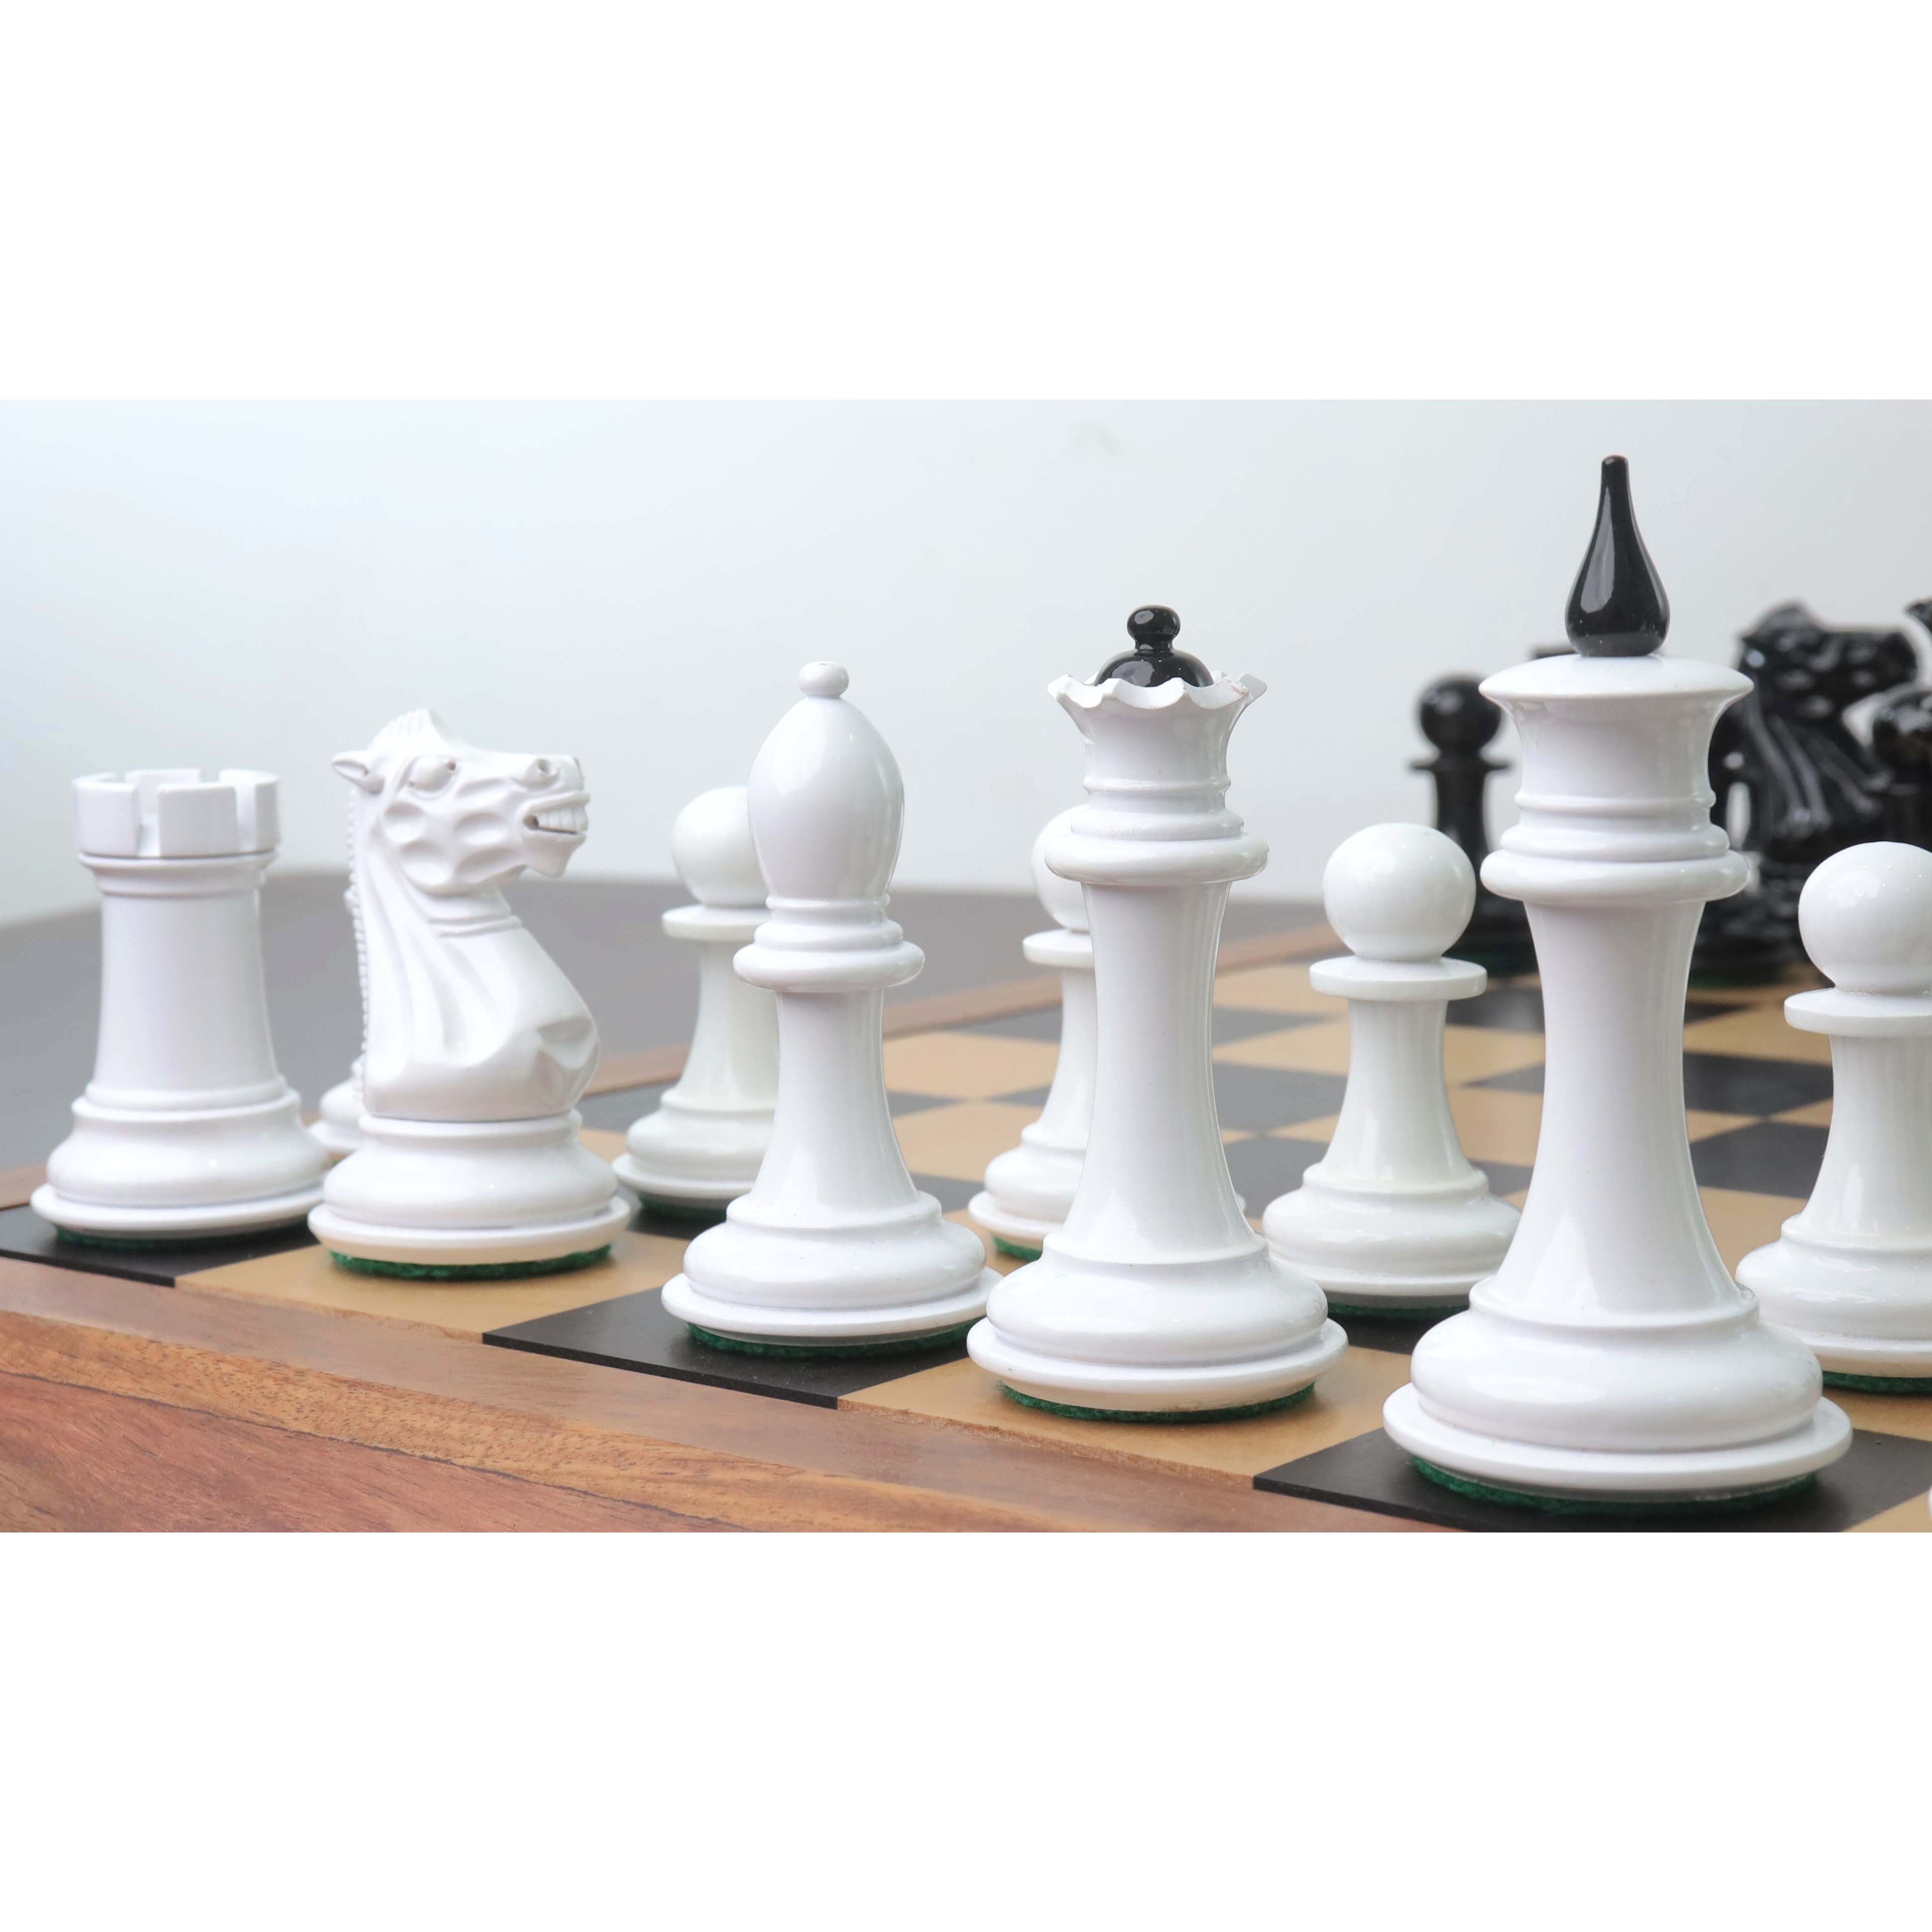 Slightly Imperfect 1940s' Soviet Reproduced Chess Pieces Only Set - Black and White Lacquer Boxwood